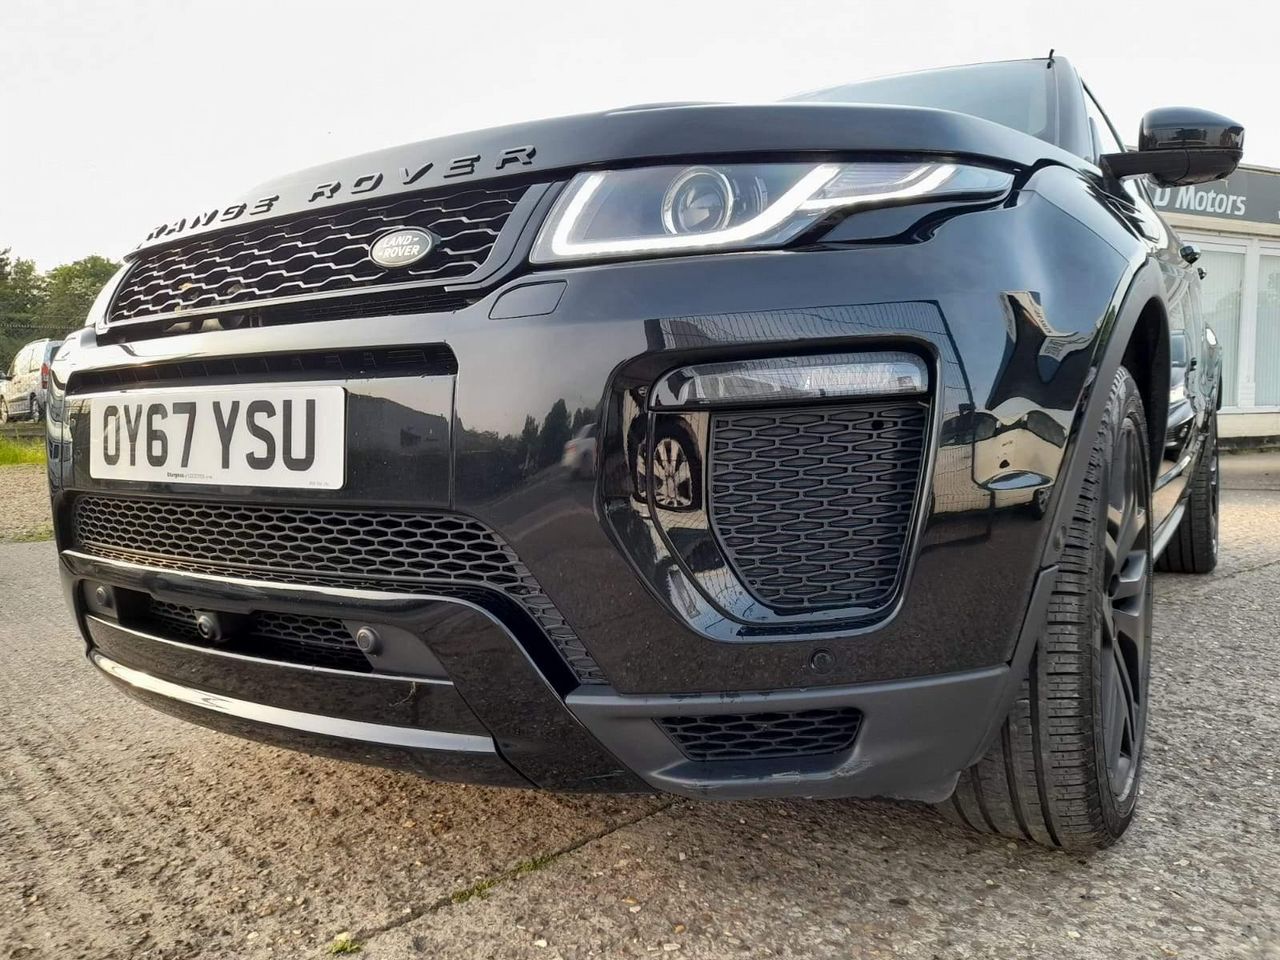 2017 Land Rover Range Rover Evoque 2.0 TD4 HSE Dynamic Auto 4WD Euro 6 (s/s) 5dr - Picture 4 of 53